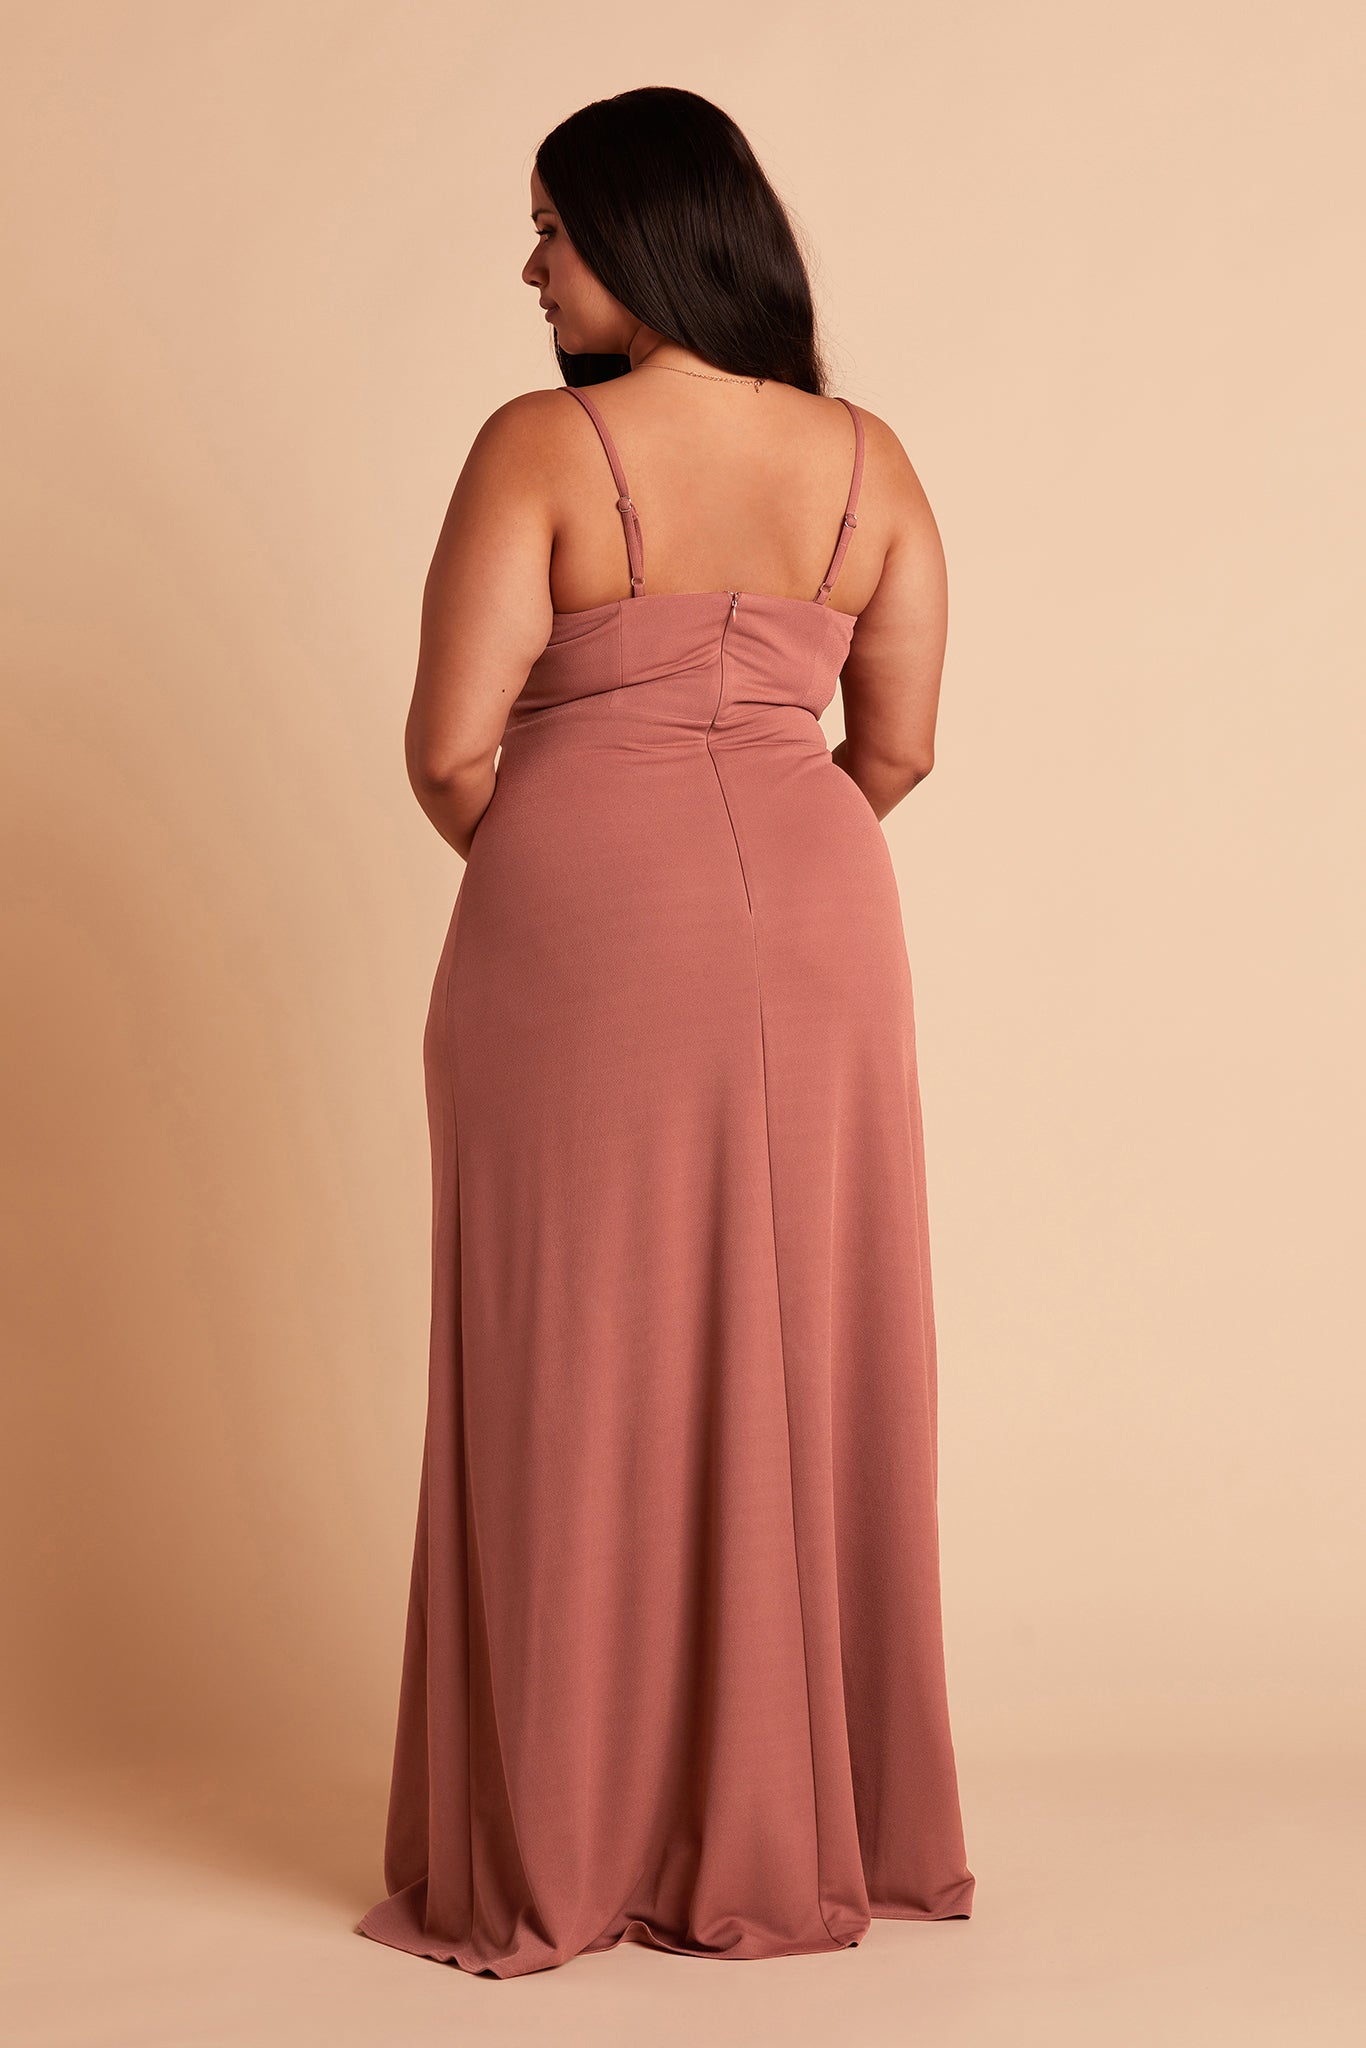 Ash plus size bridesmaid dress with slit in desert rose crepe by Birdy Grey, back view